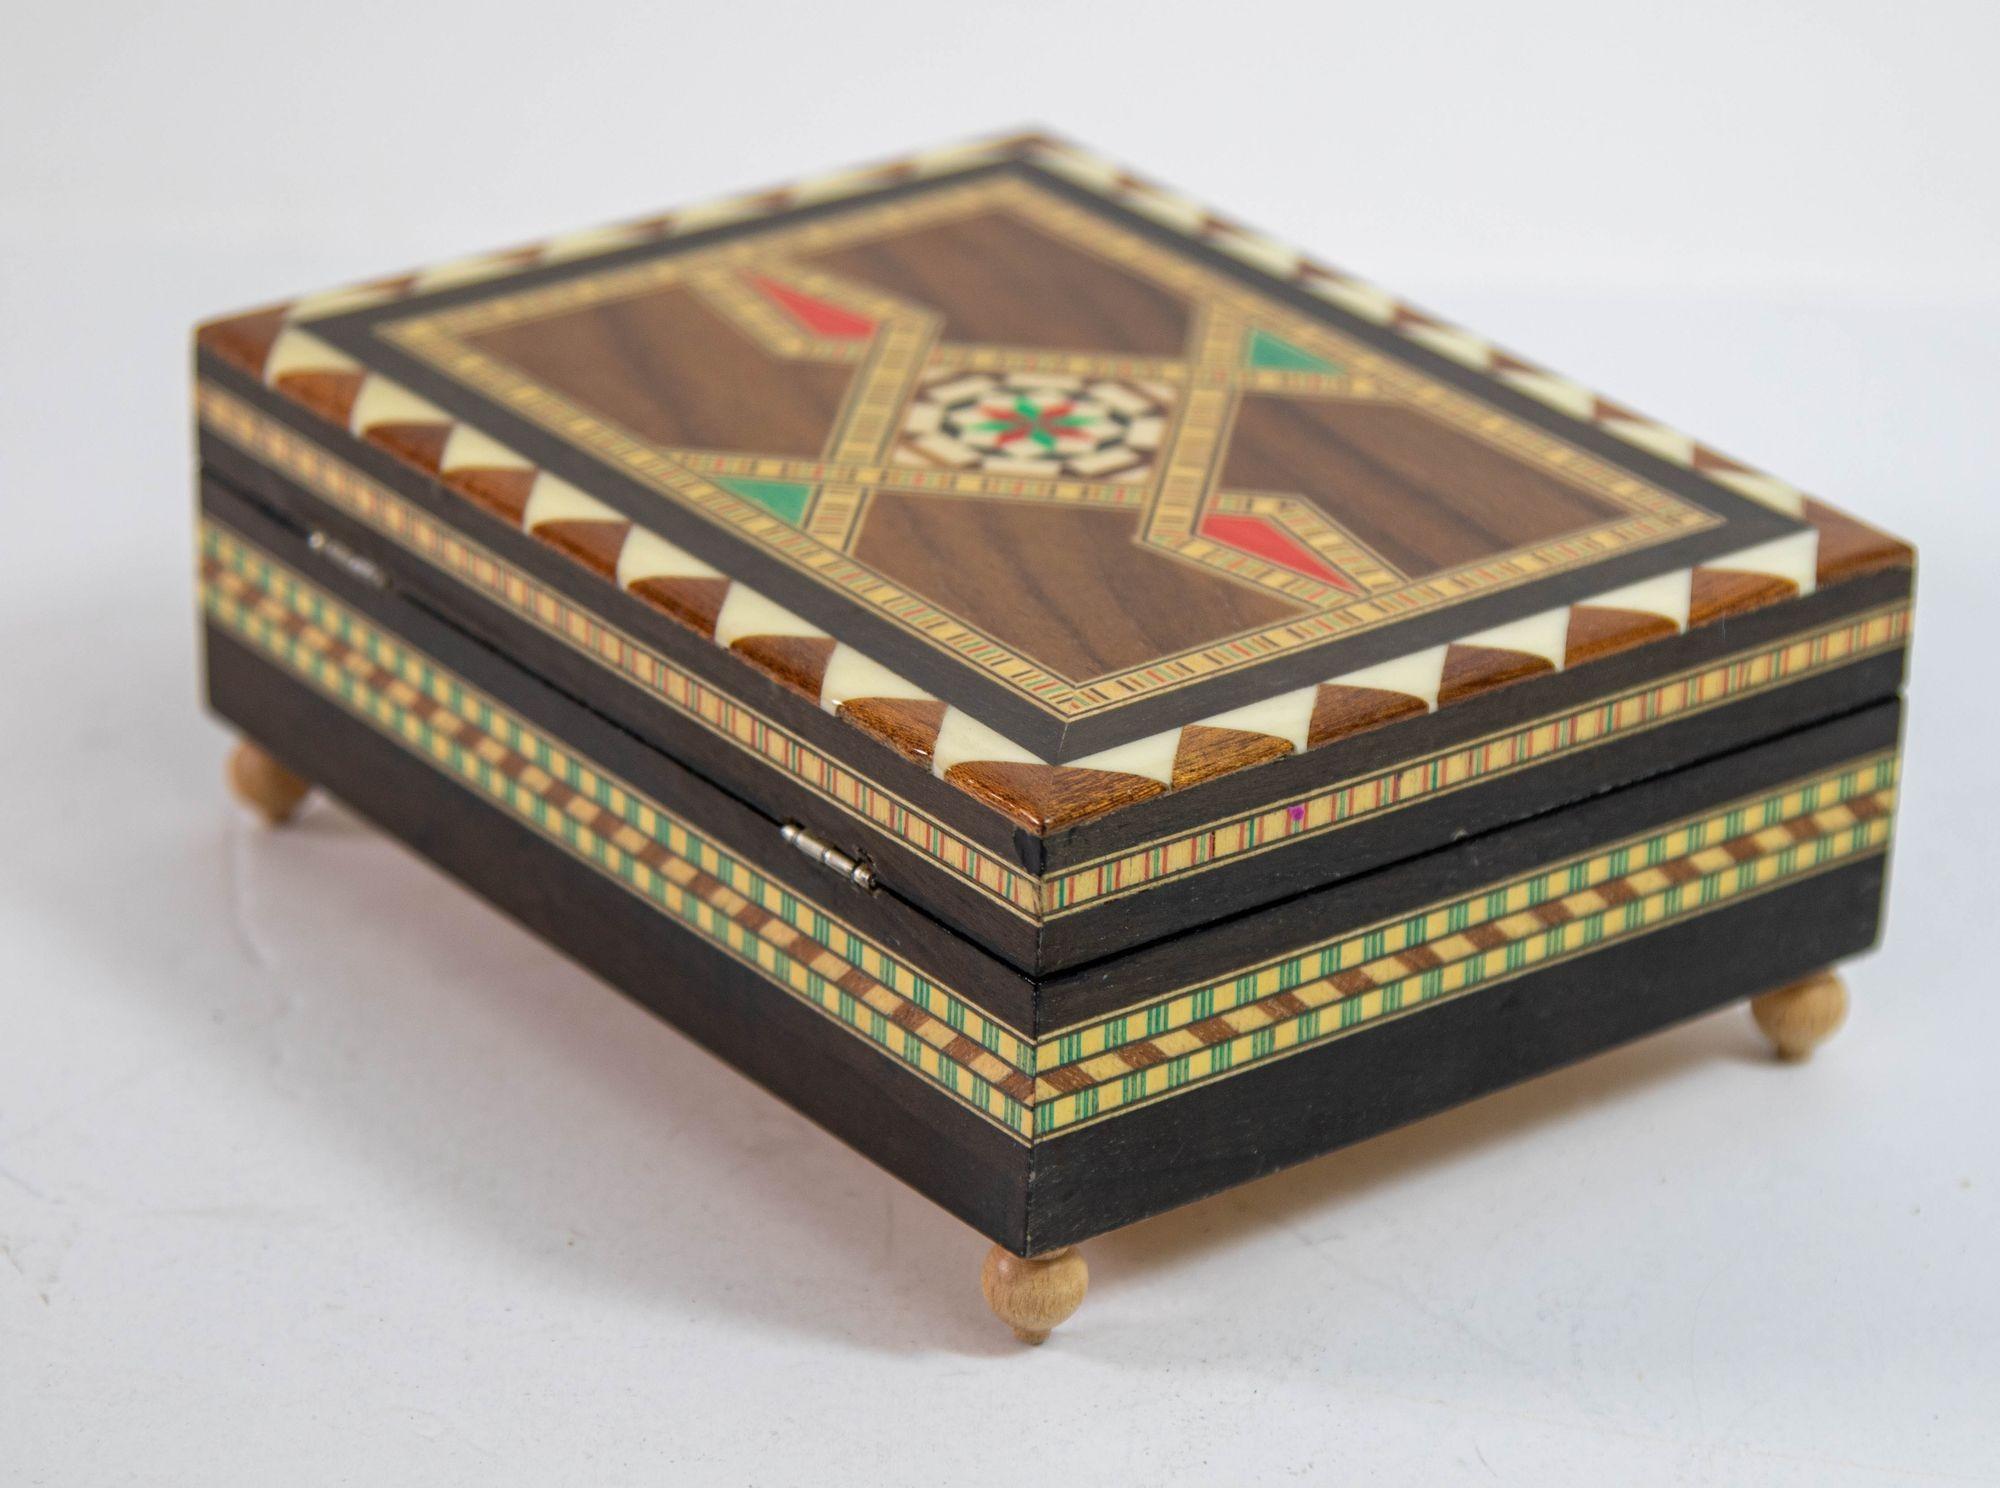 1950s Moorish Spain Music Box: This exquisite handcrafted box, made in Granada, Spain, showcases the intricate art of Islamic Moorish marquetry. The Spanish inlaid Marquetry music box features geometric designs in precious wood, reminiscent of the